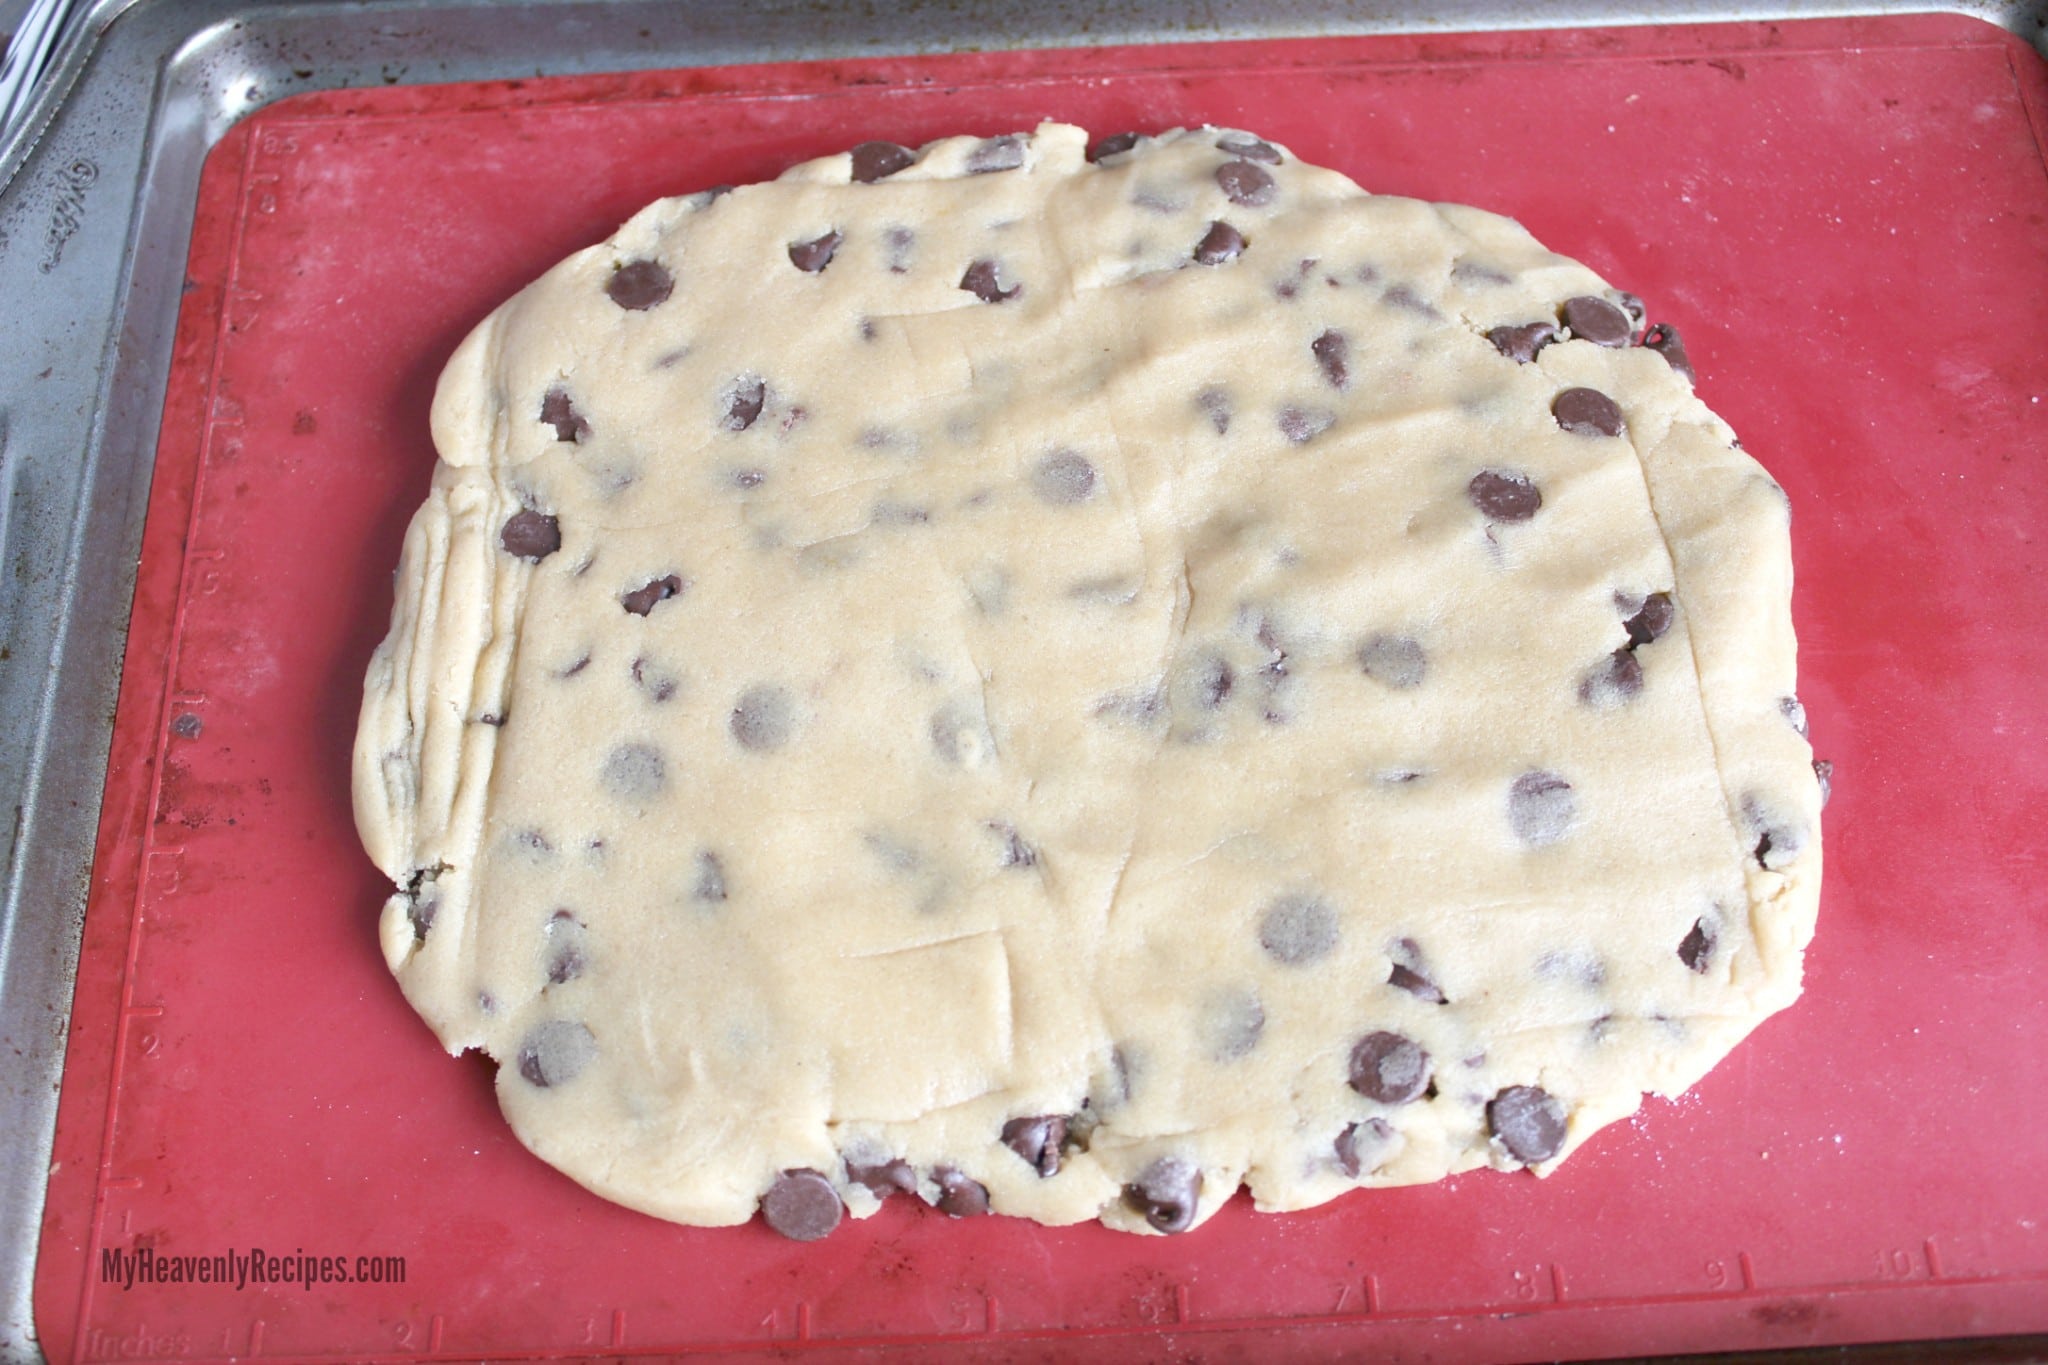 Chocolate Chip Cookie Dough Rolled Out on a baking sheet